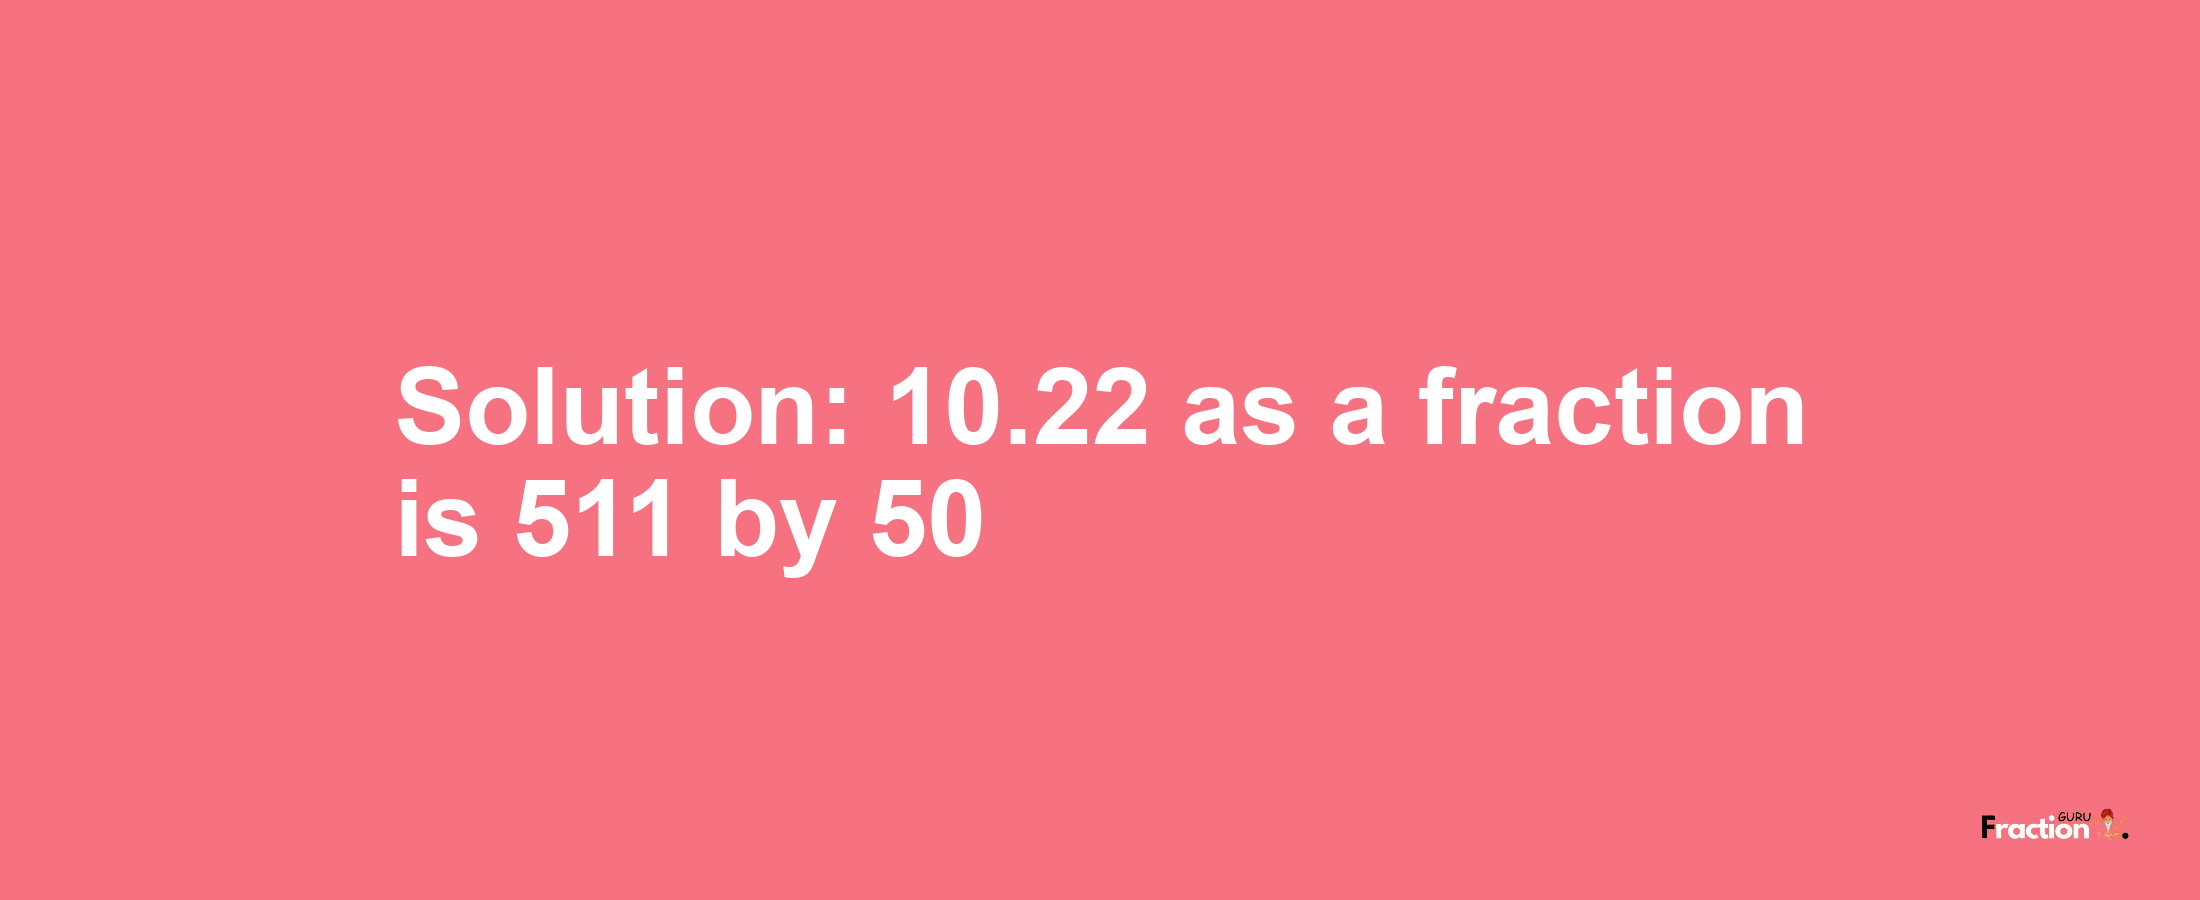 Solution:10.22 as a fraction is 511/50